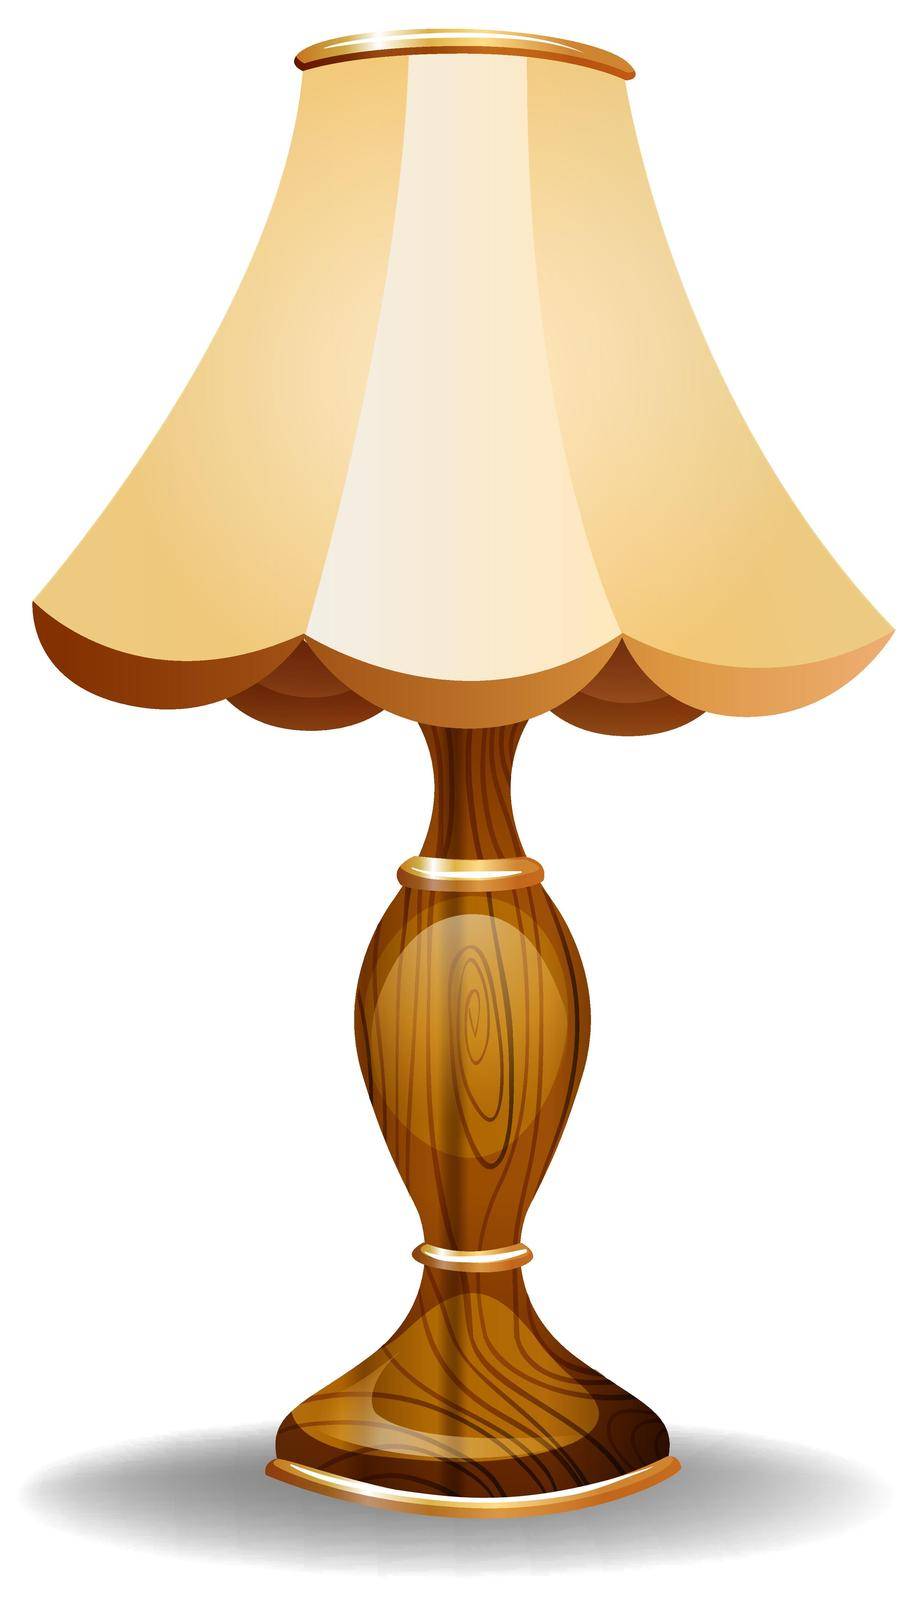 Beautiful vintage lamp on a white background